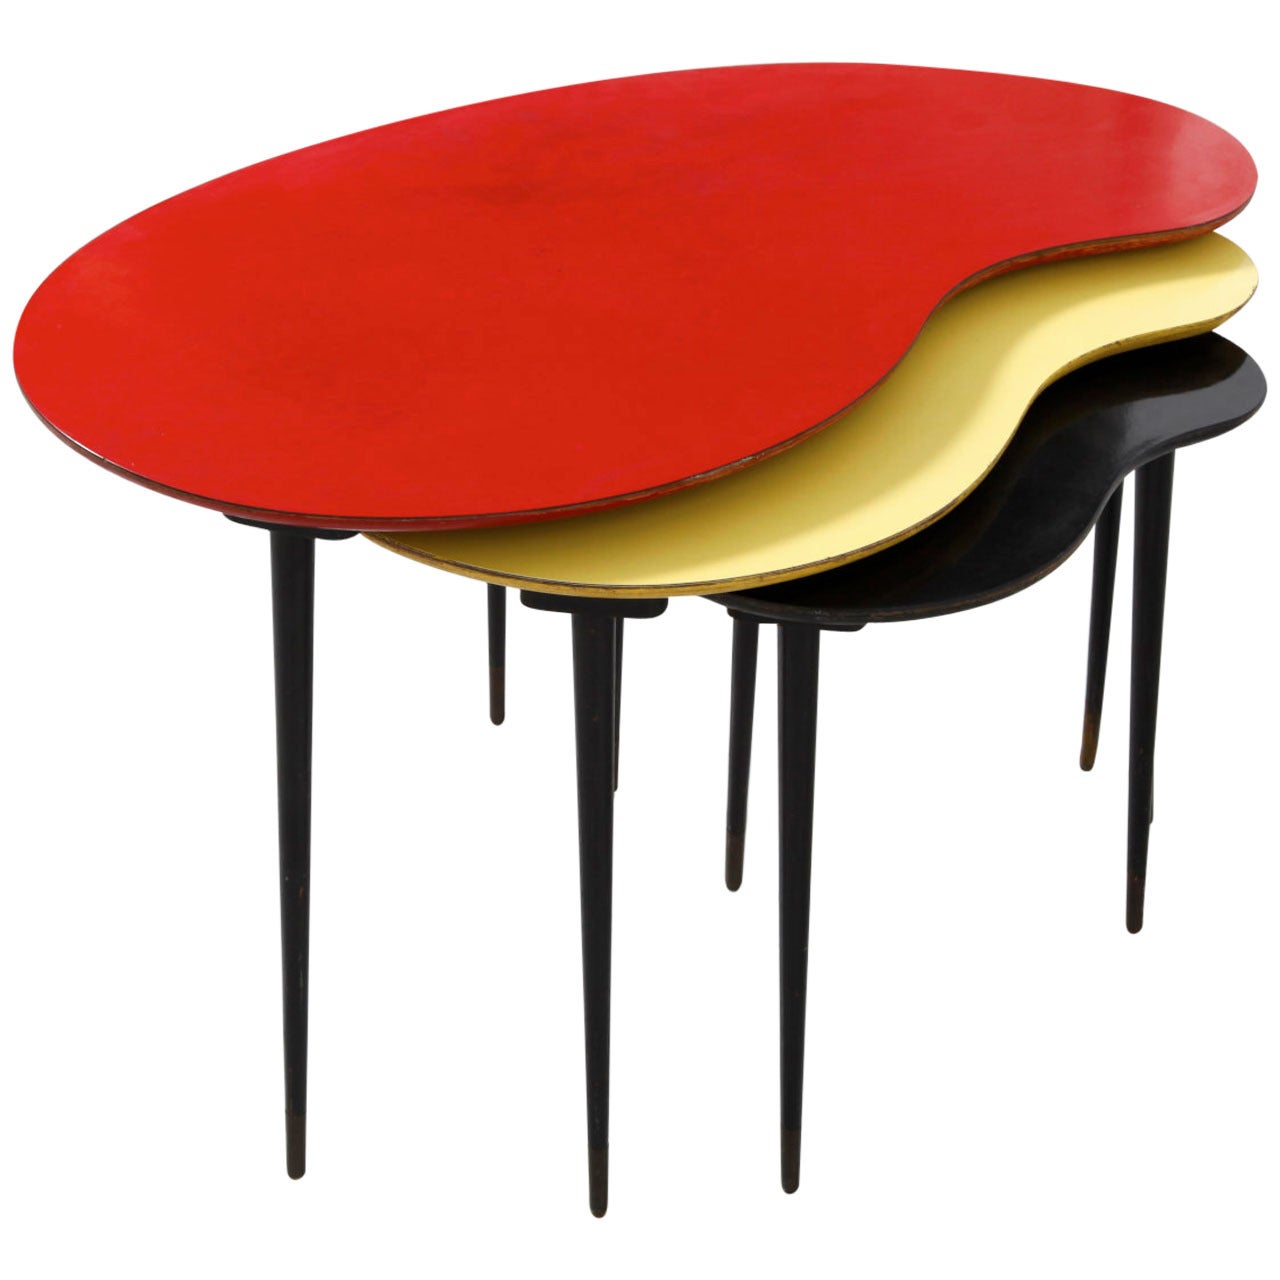 Expo 58 Side Tables